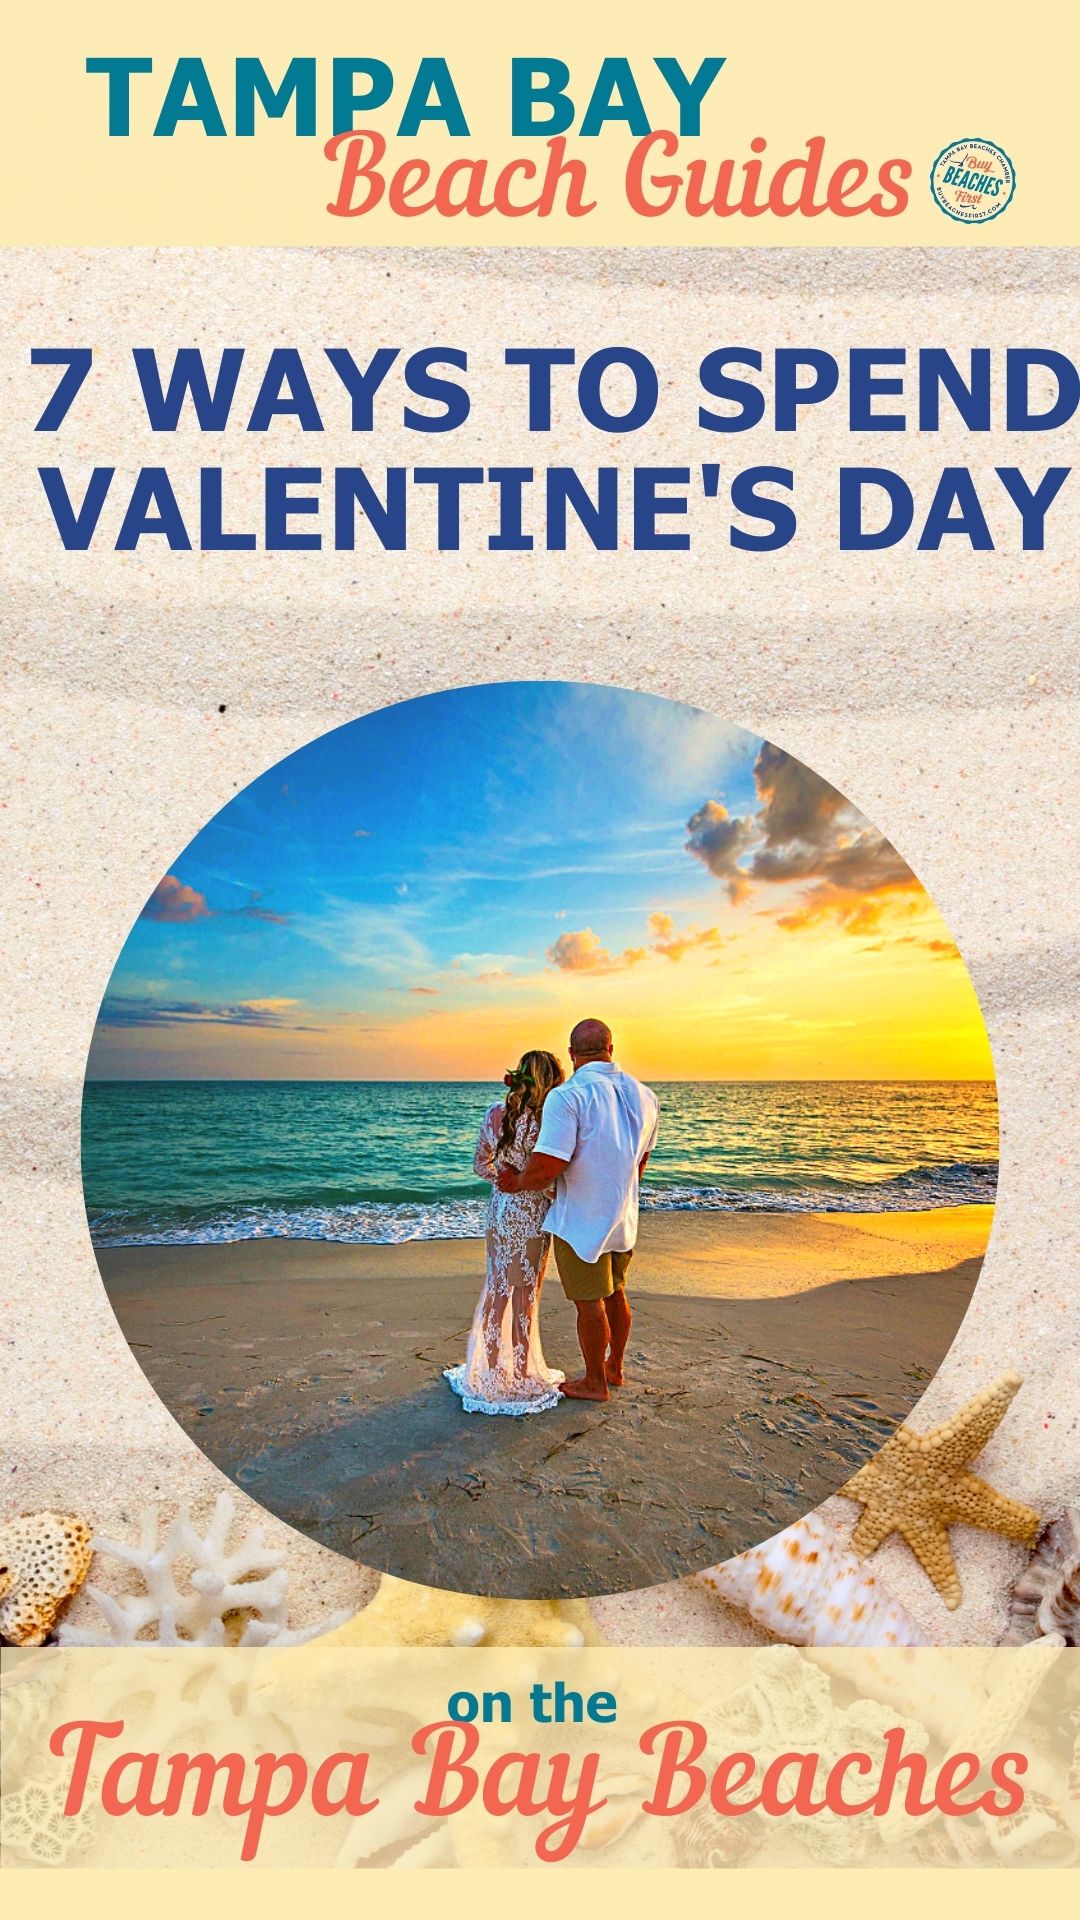 Image for 7 Ways to Celebrate Valentine’s Day on the Tampa Bay Beaches